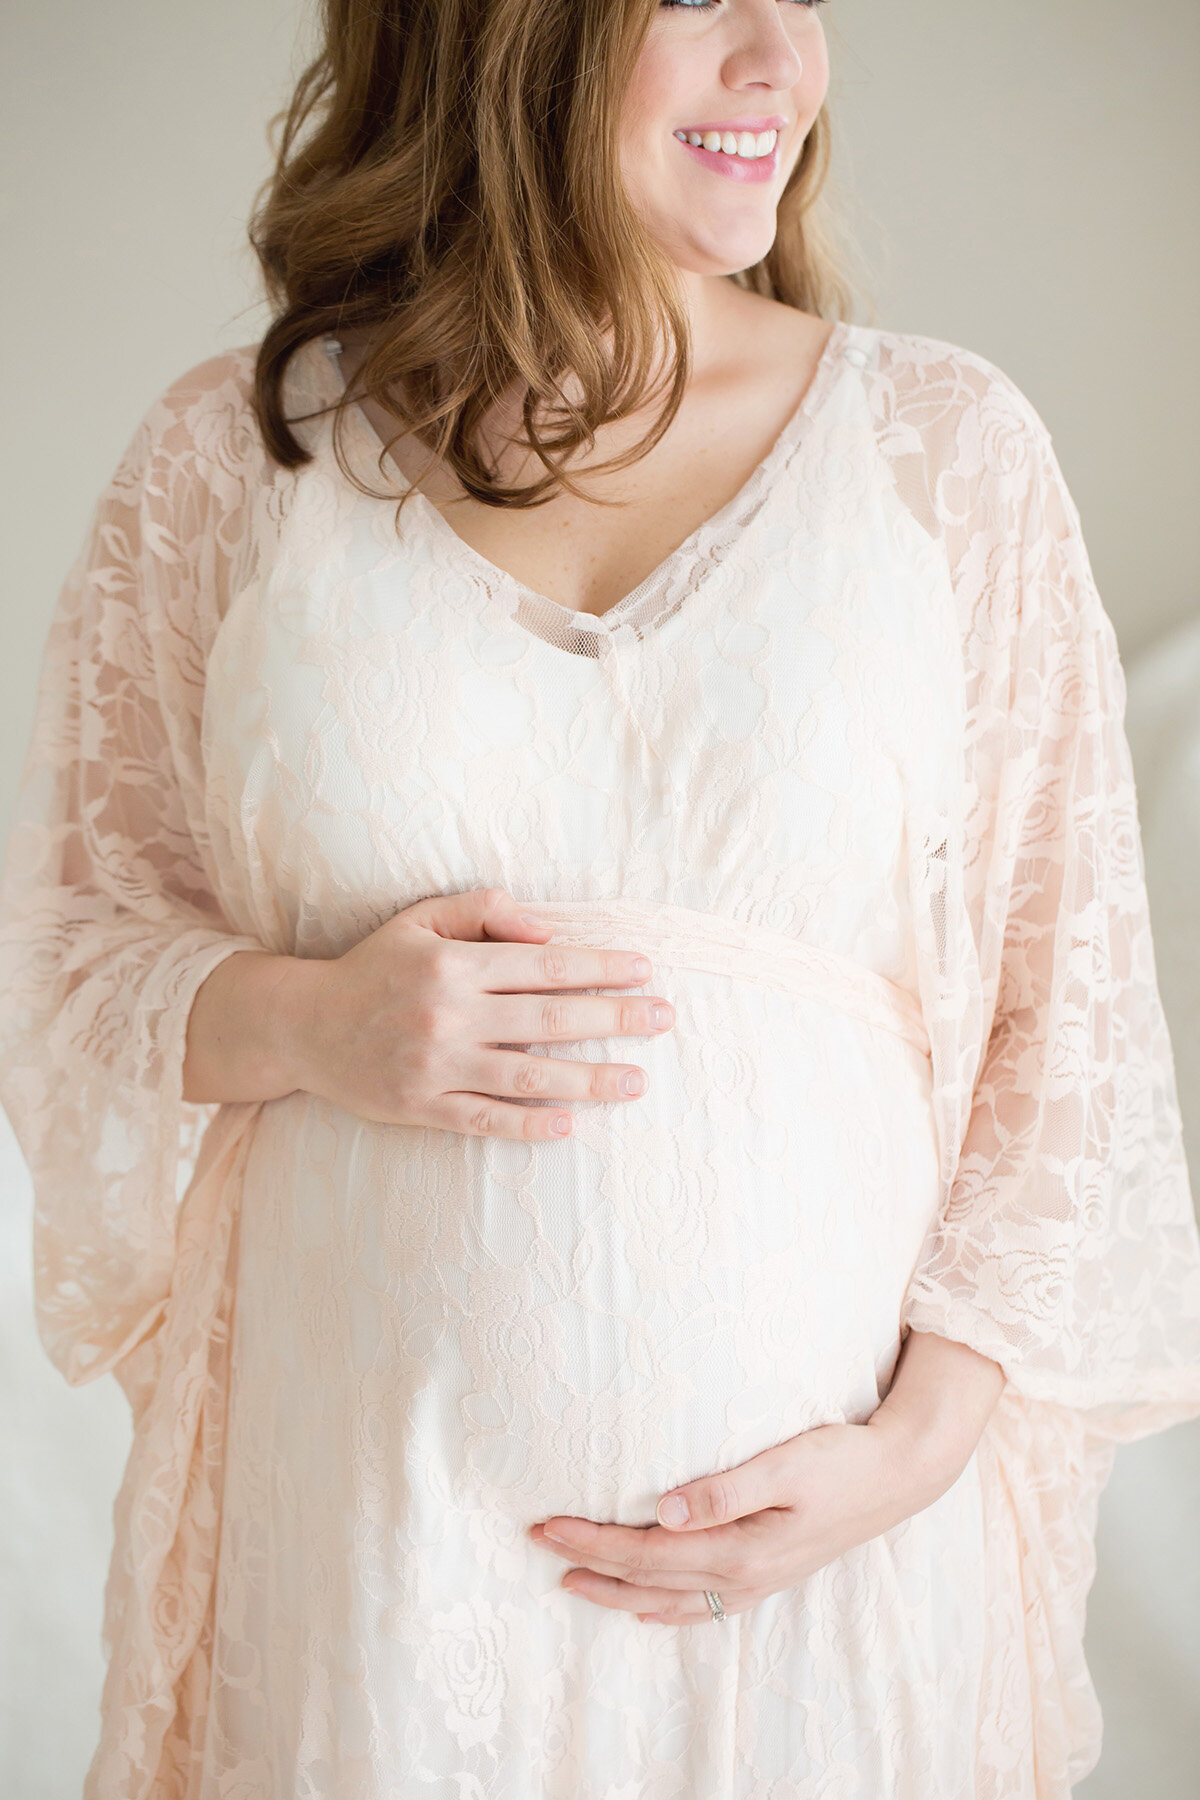 maternity-newborn-baby-first-year-photography-studio-louisville-ky-julie-brock-lace-dress-for-photo-session